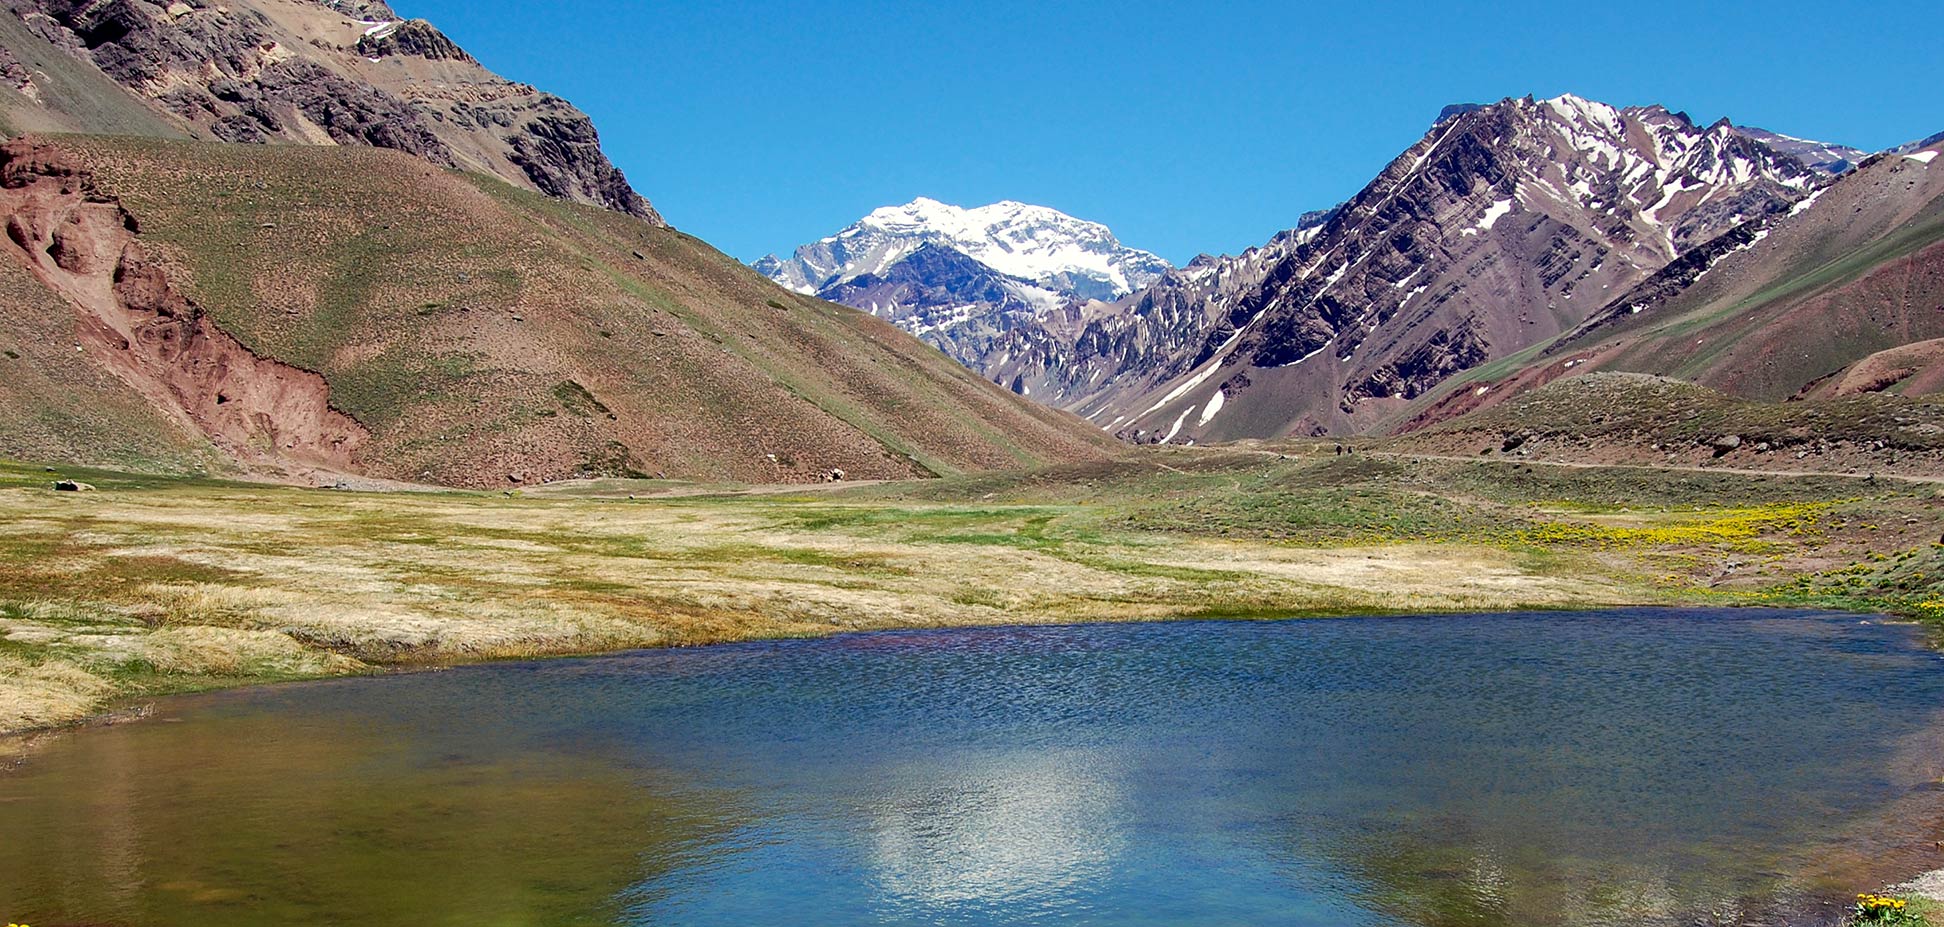 View of Aconcagua Mountain (center), with 6,961 m it is the highest peak outside the Himalayas